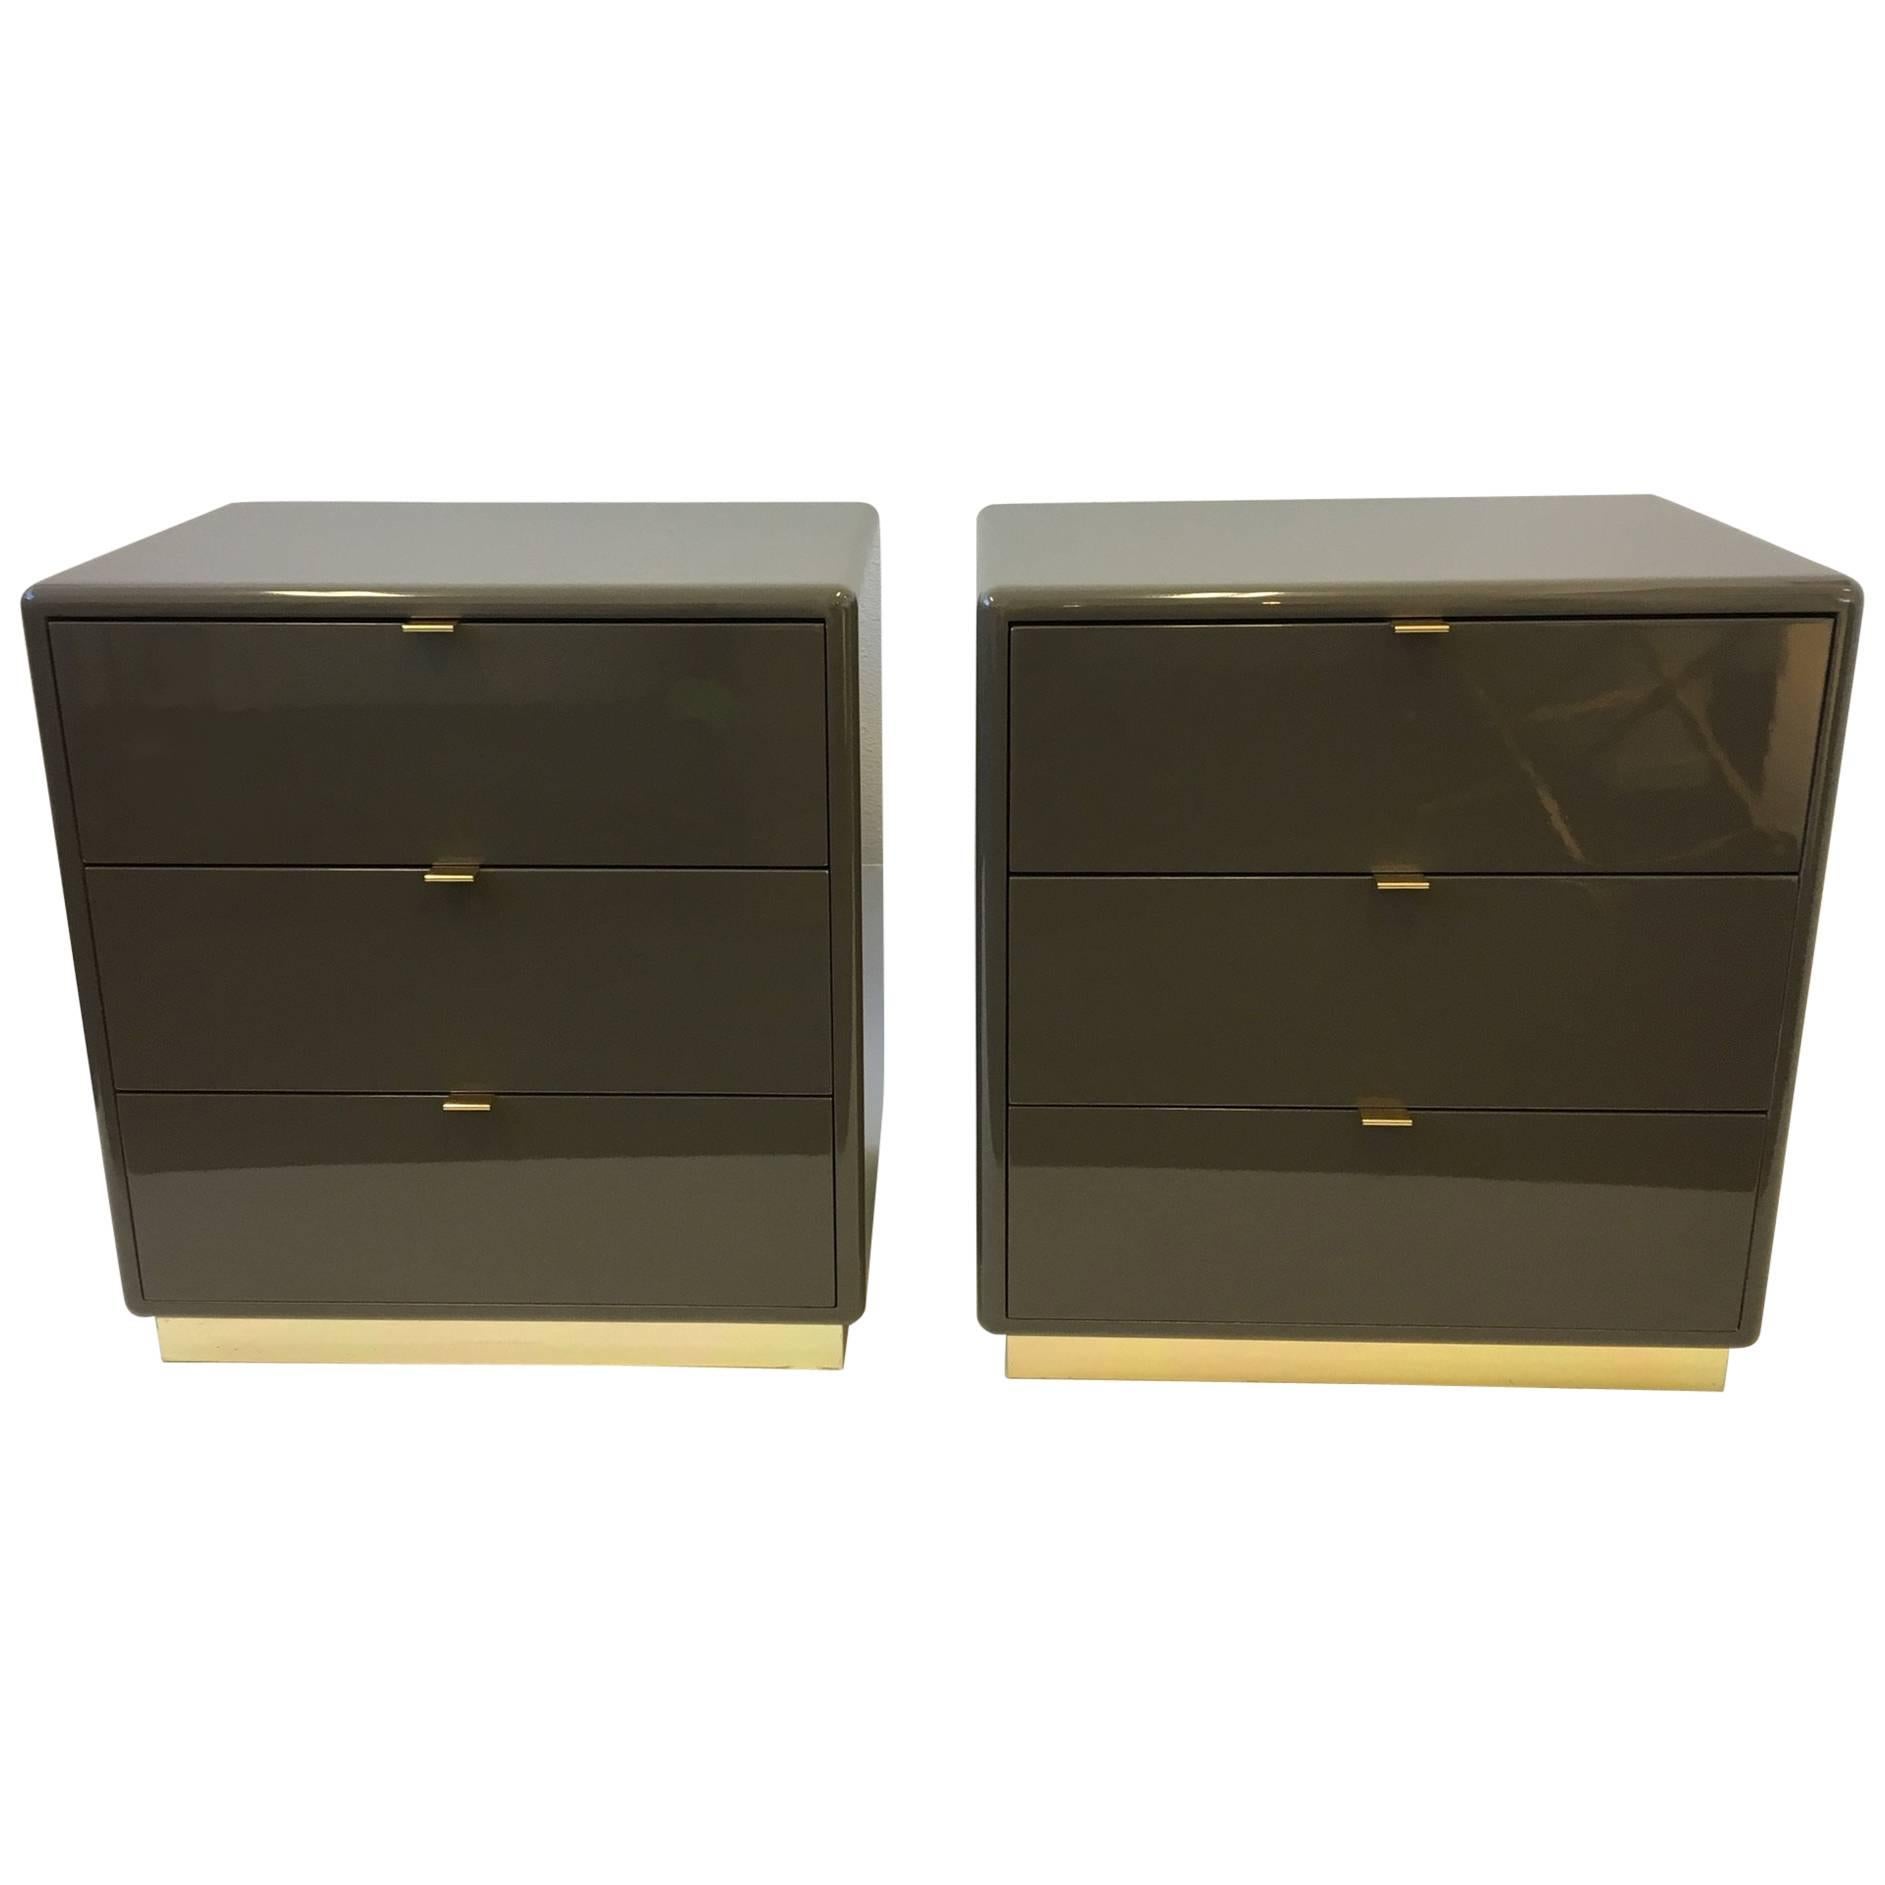 Pair of Light Brown Lacquer and Brass Nightstands by Steve Chase